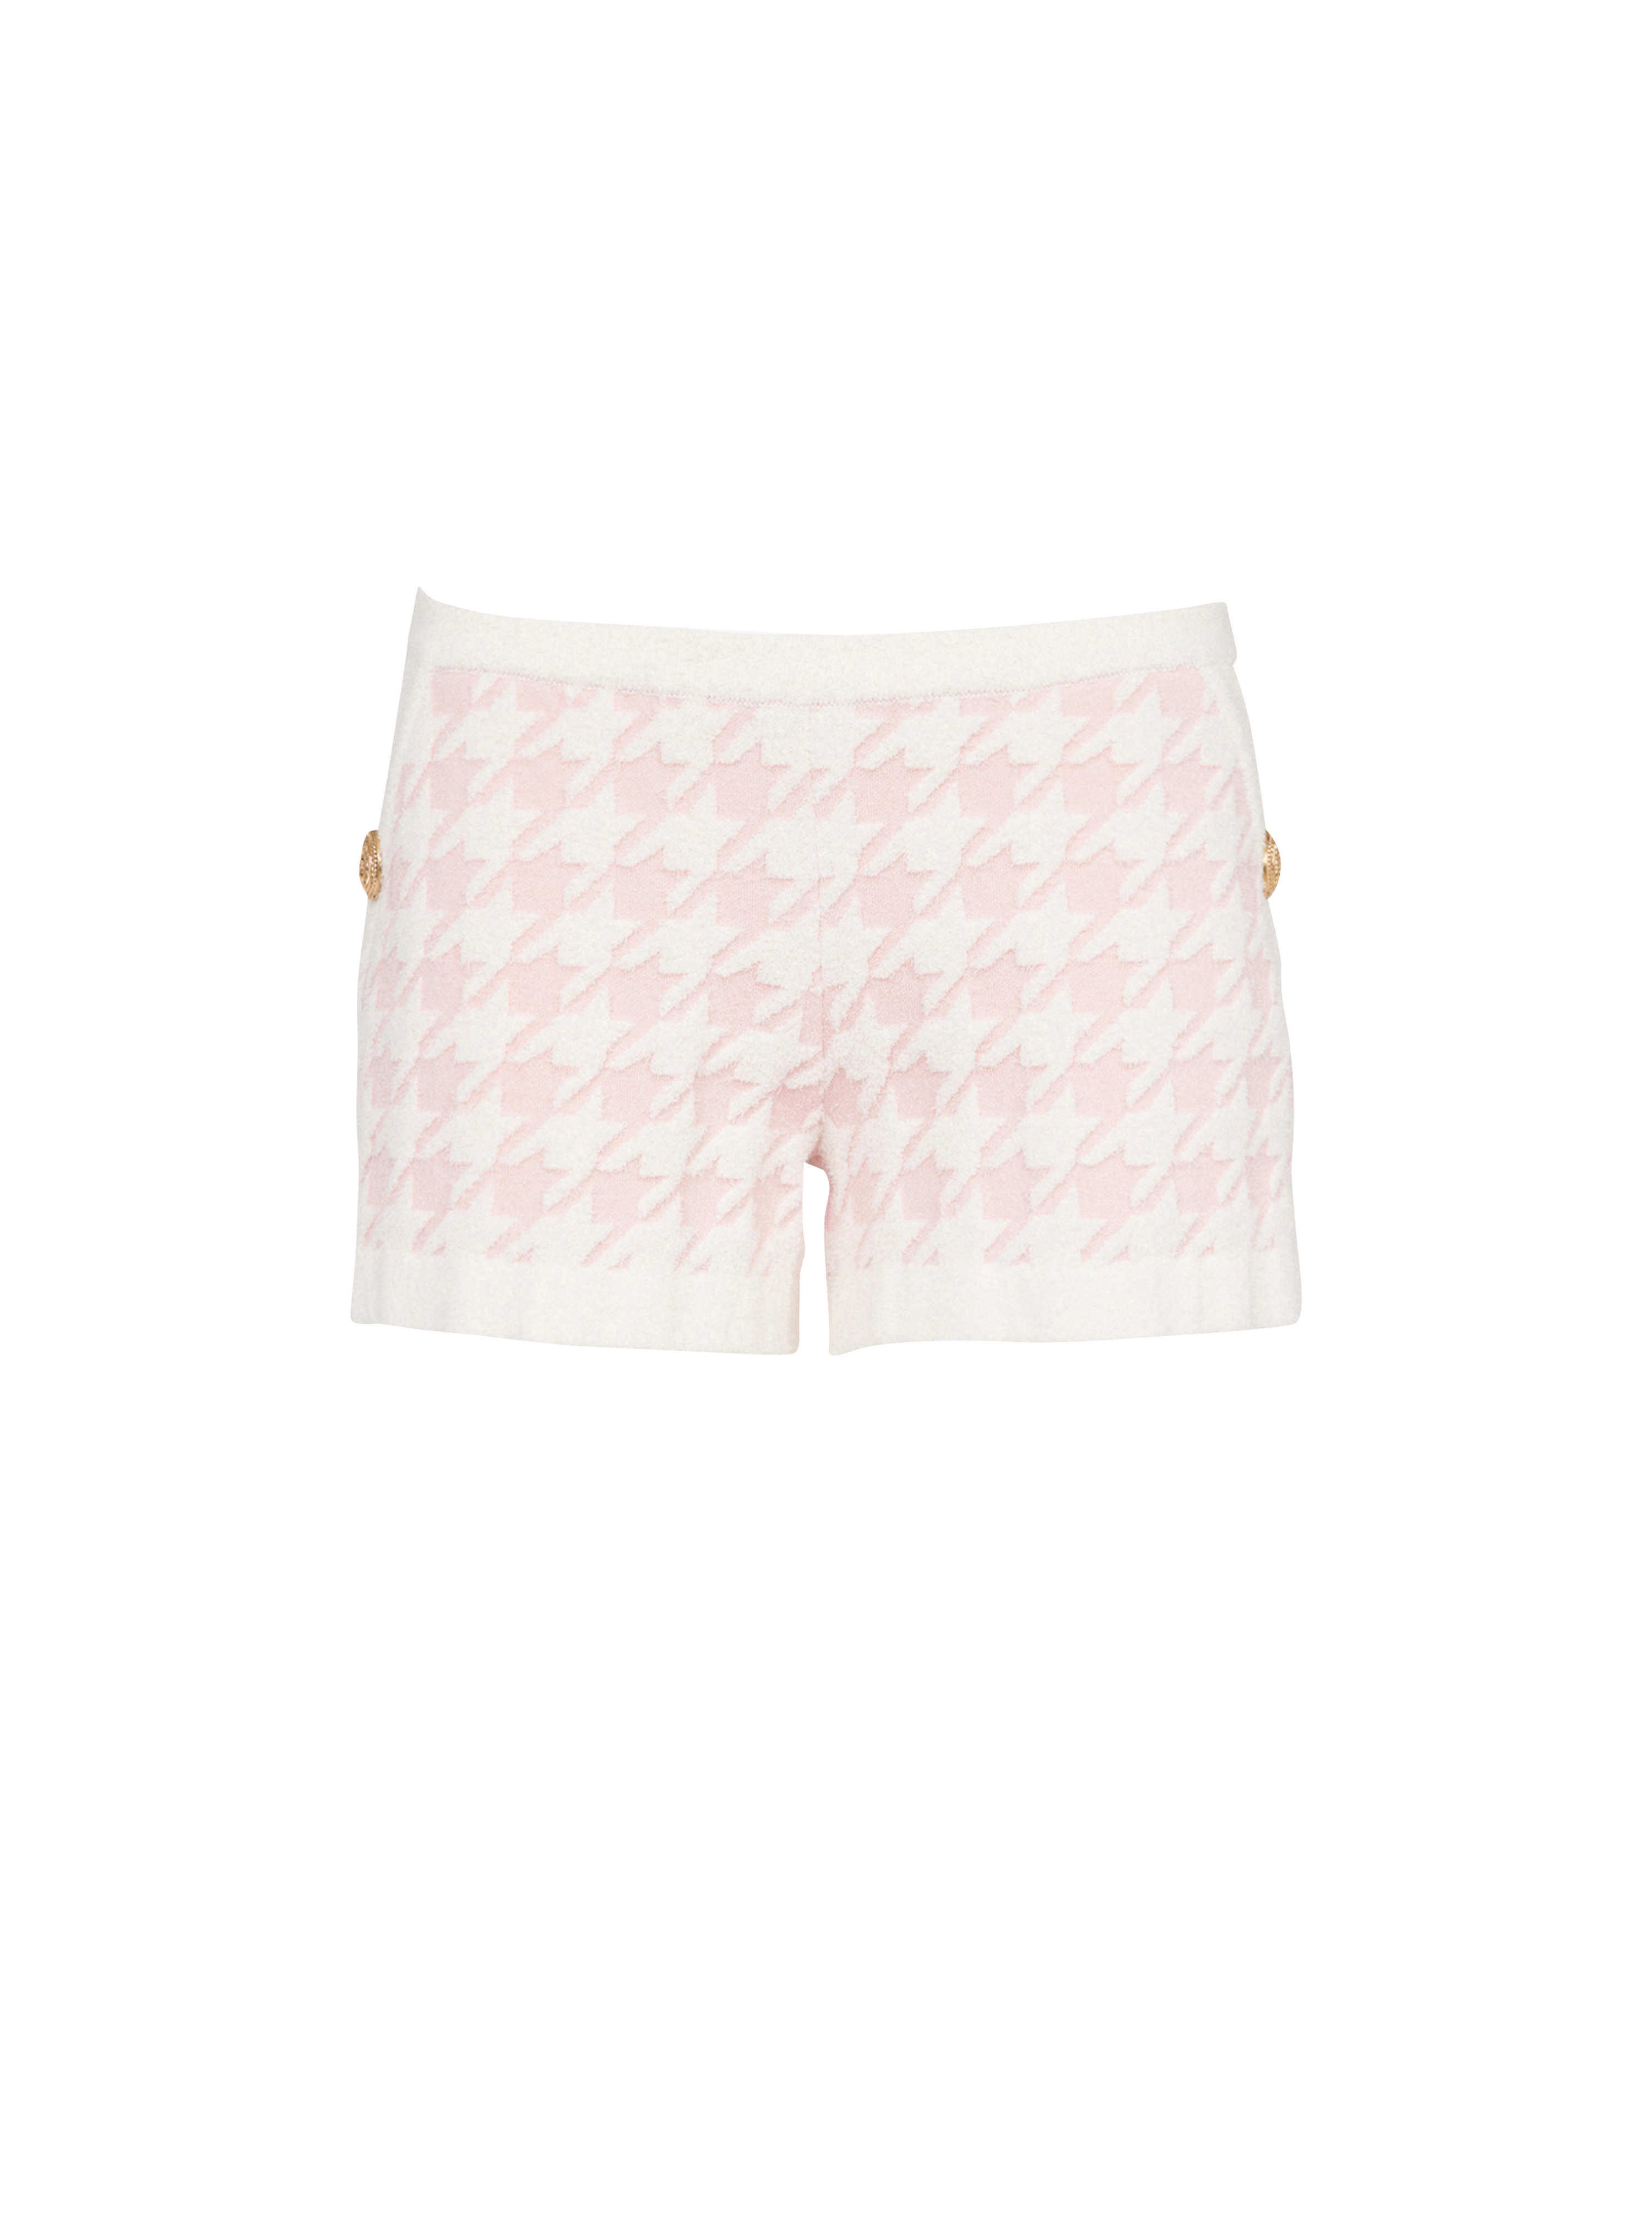 Houndstooth print high-waisted tweed shorts, pink